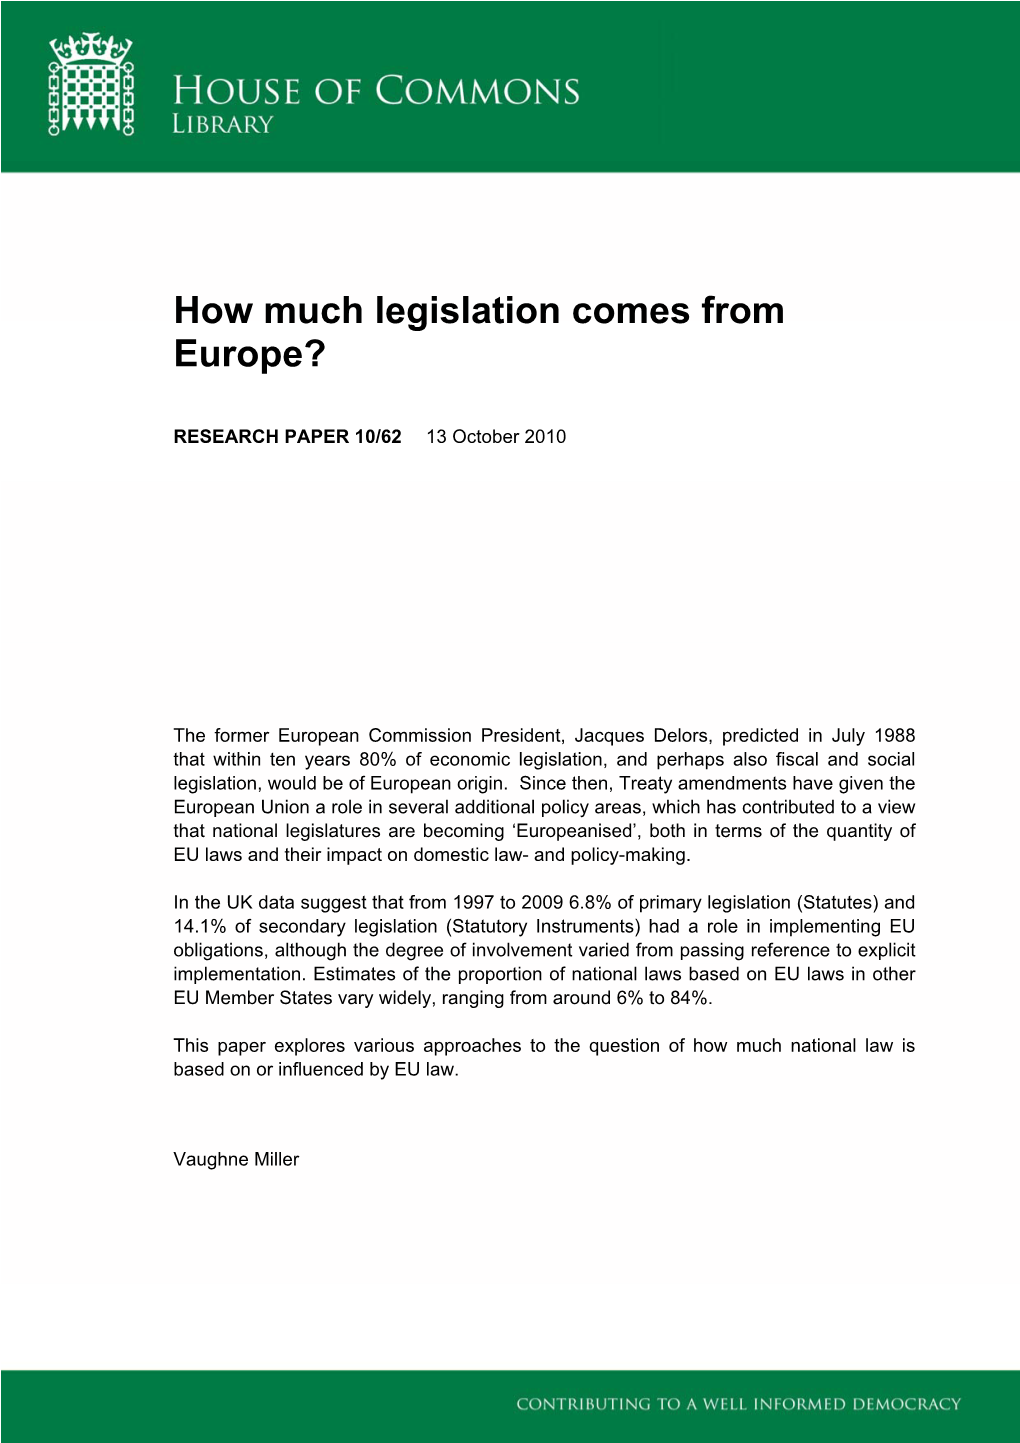 How Much Legislation Comes from Europe?